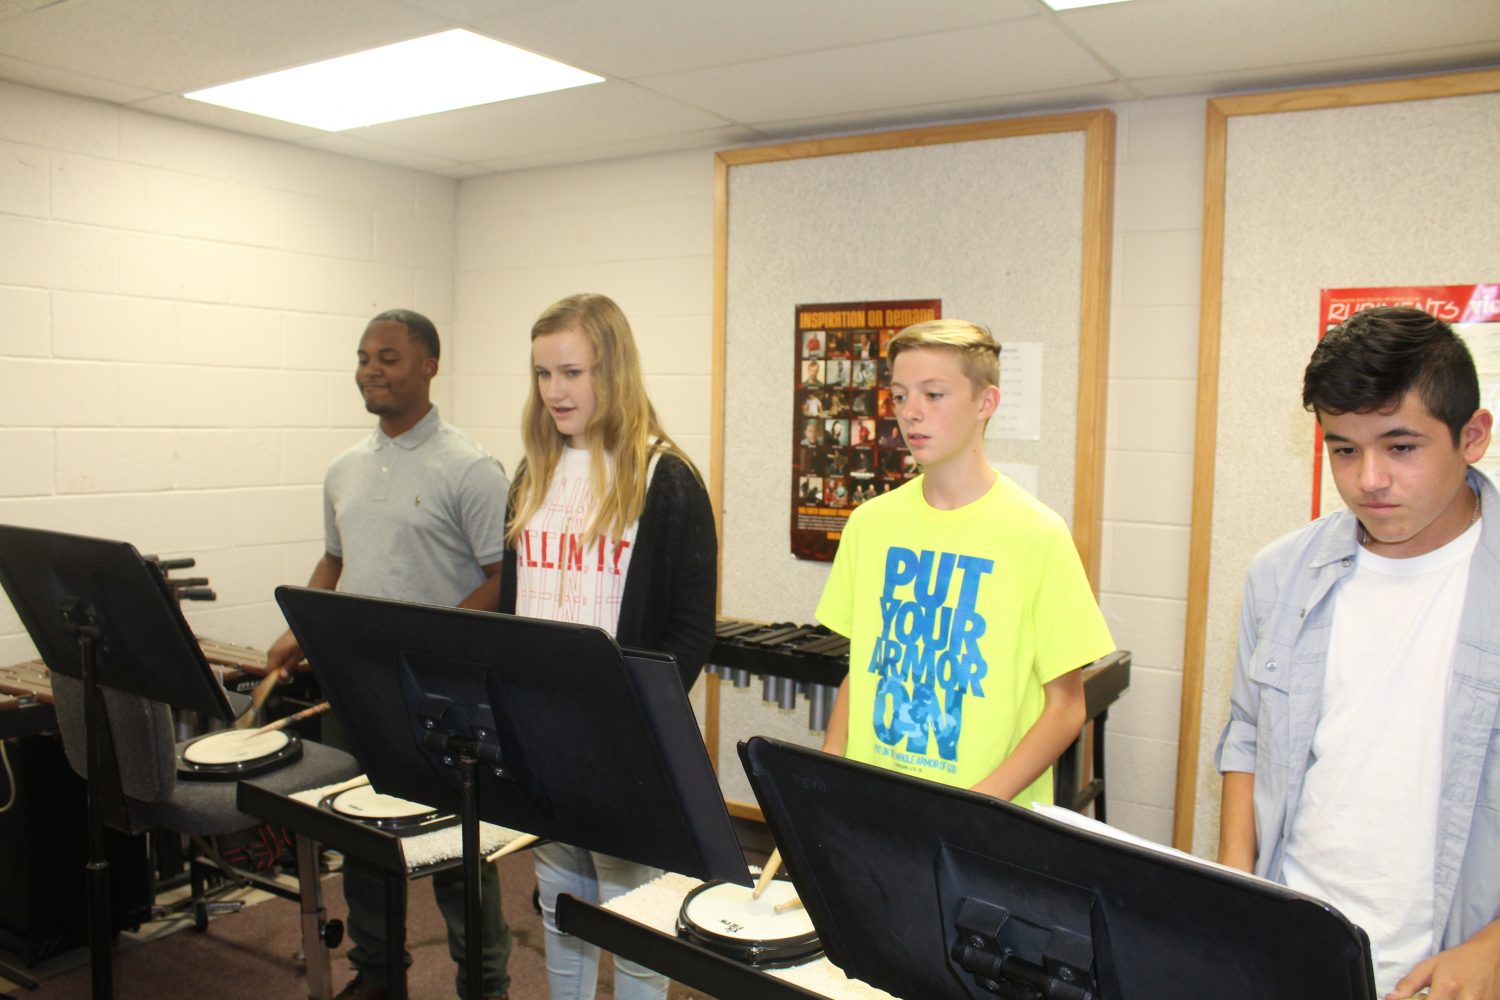 Band program plays on at DMS